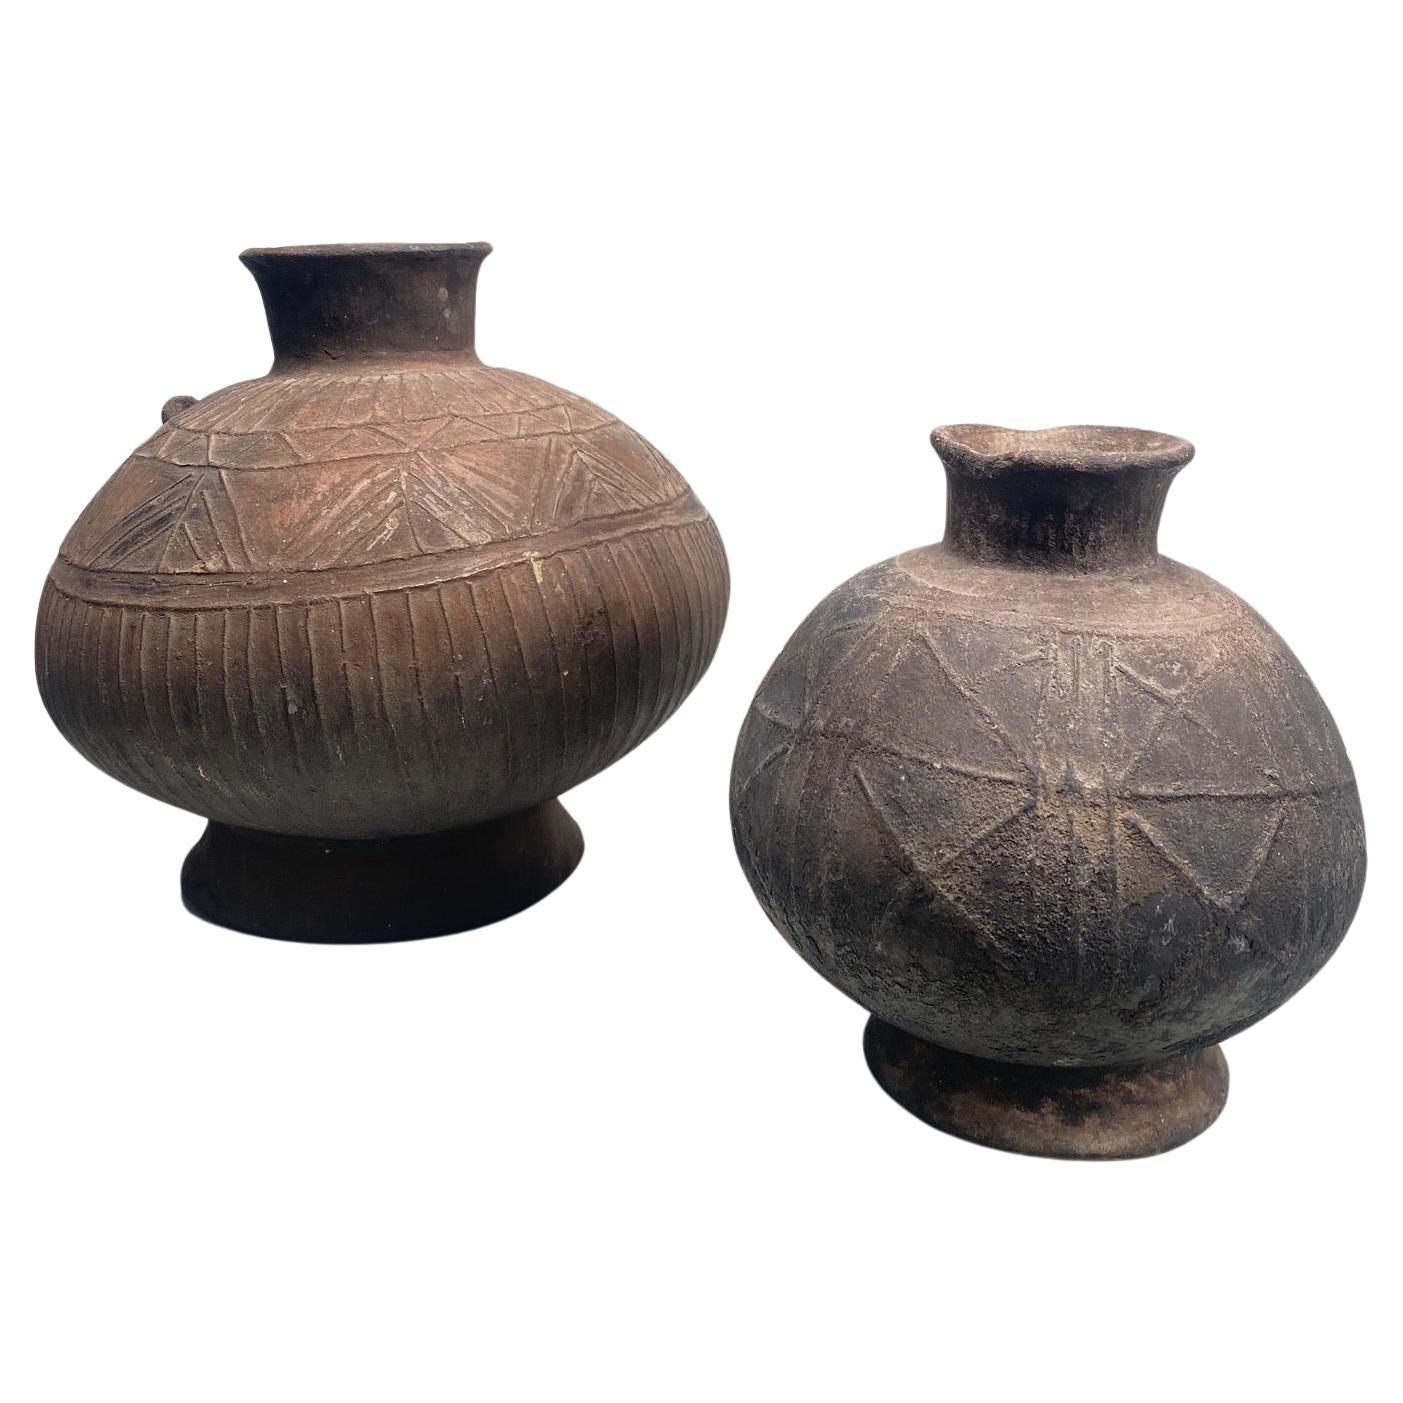 Set of two handmade African Vases with Geometric Decorations